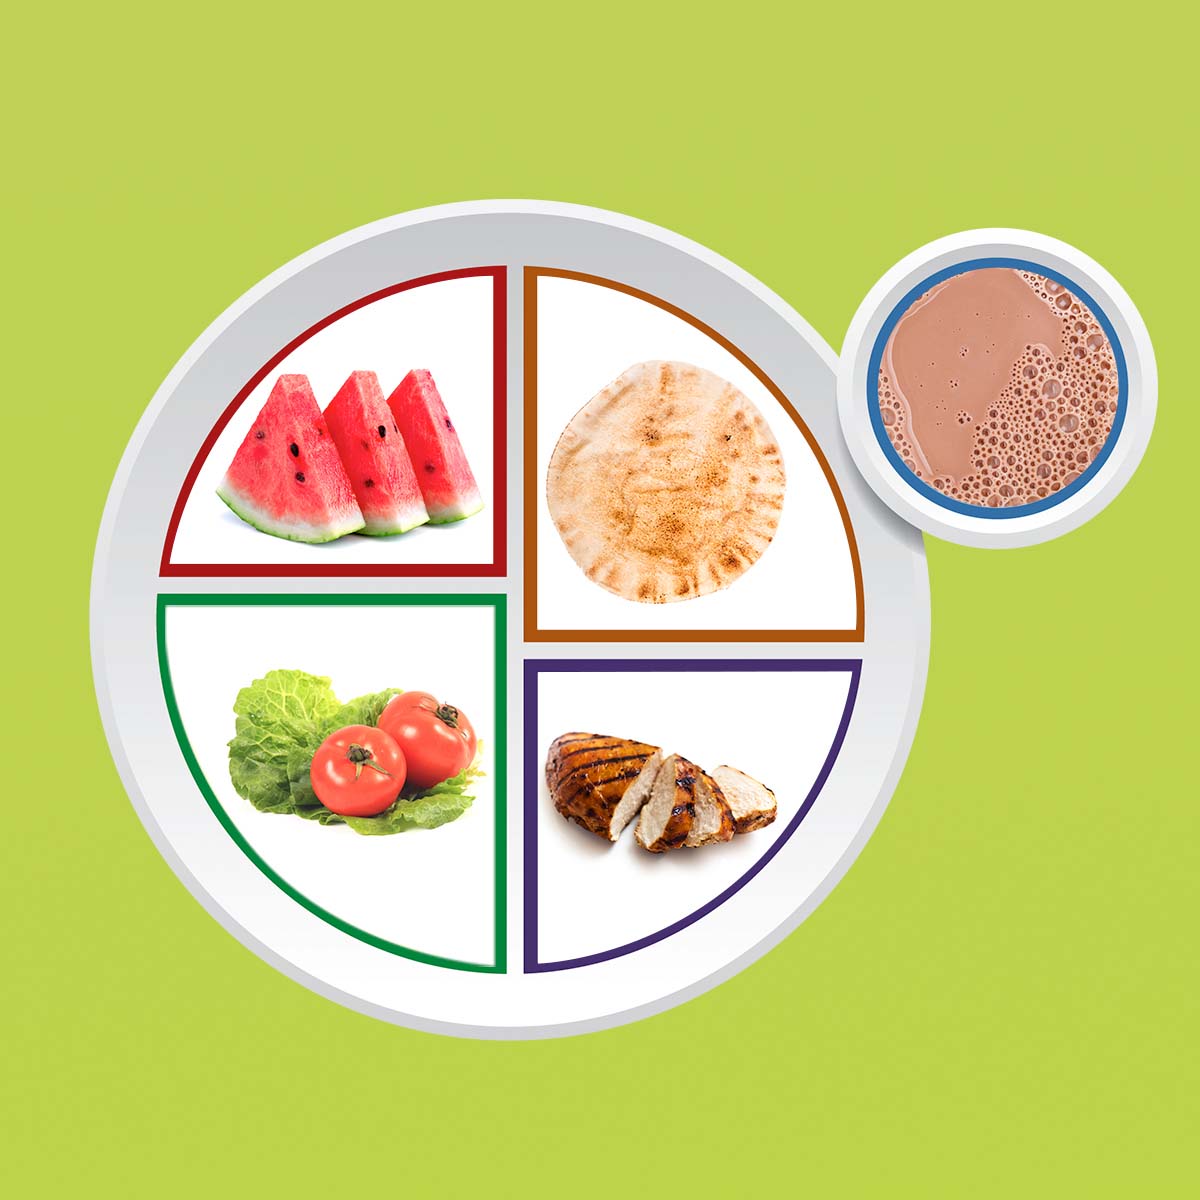 Flavored Milk and MyPlate: a Nutritious Duo